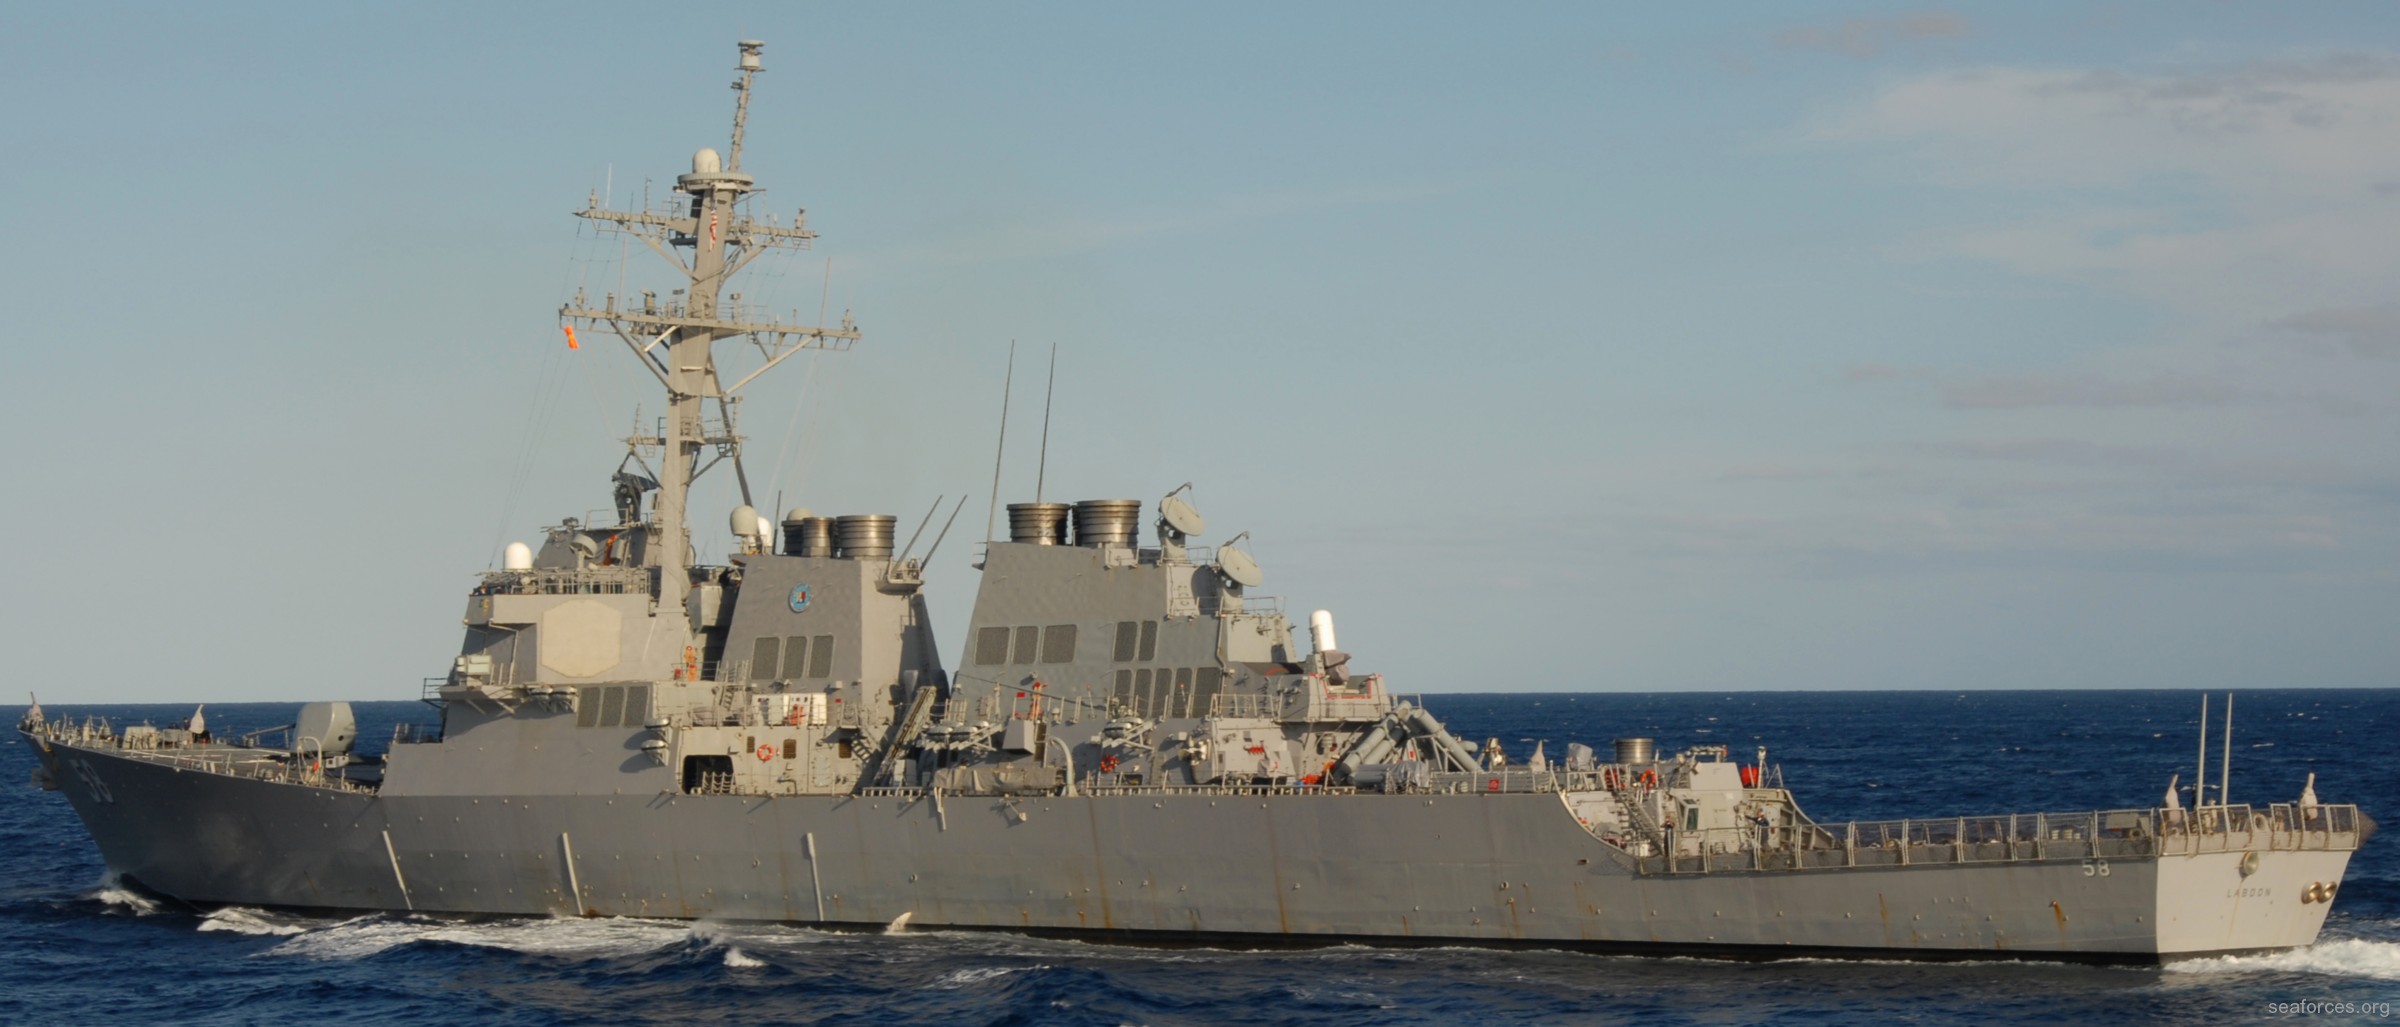 ddg-58 uss laboon guided missile destroyer us navy 85